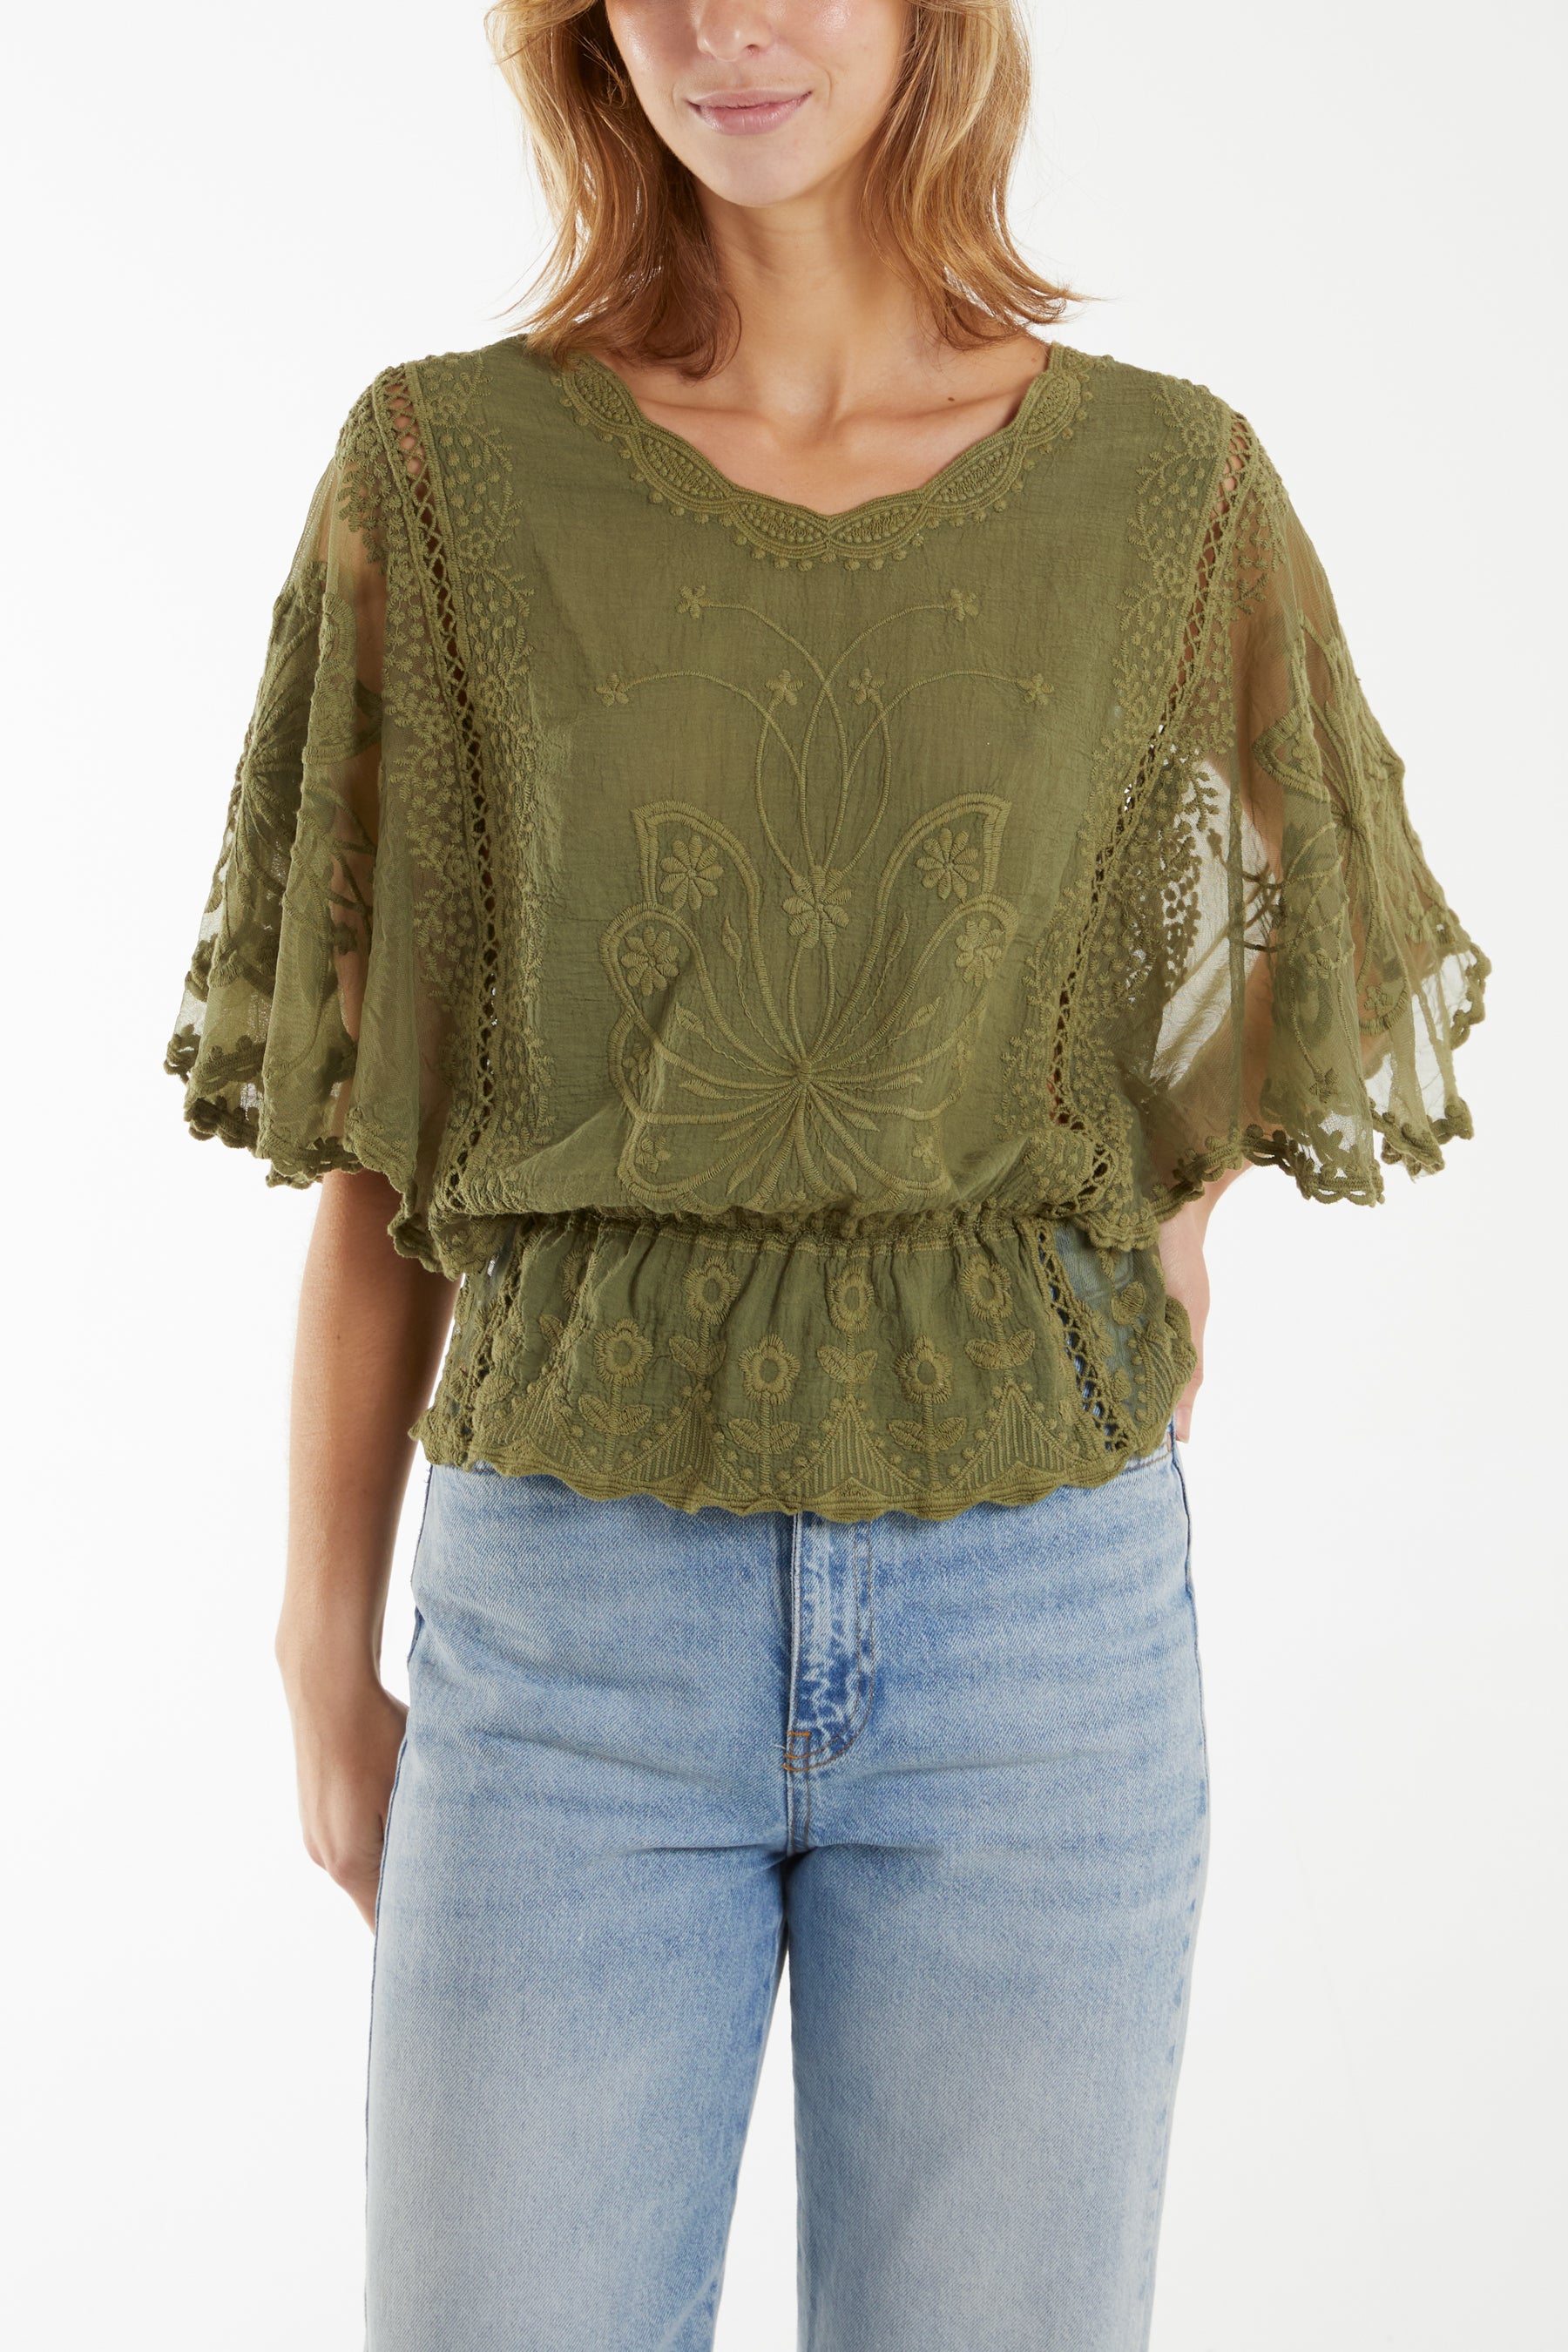 Floral Lace Butterfly Sleeve Blouse